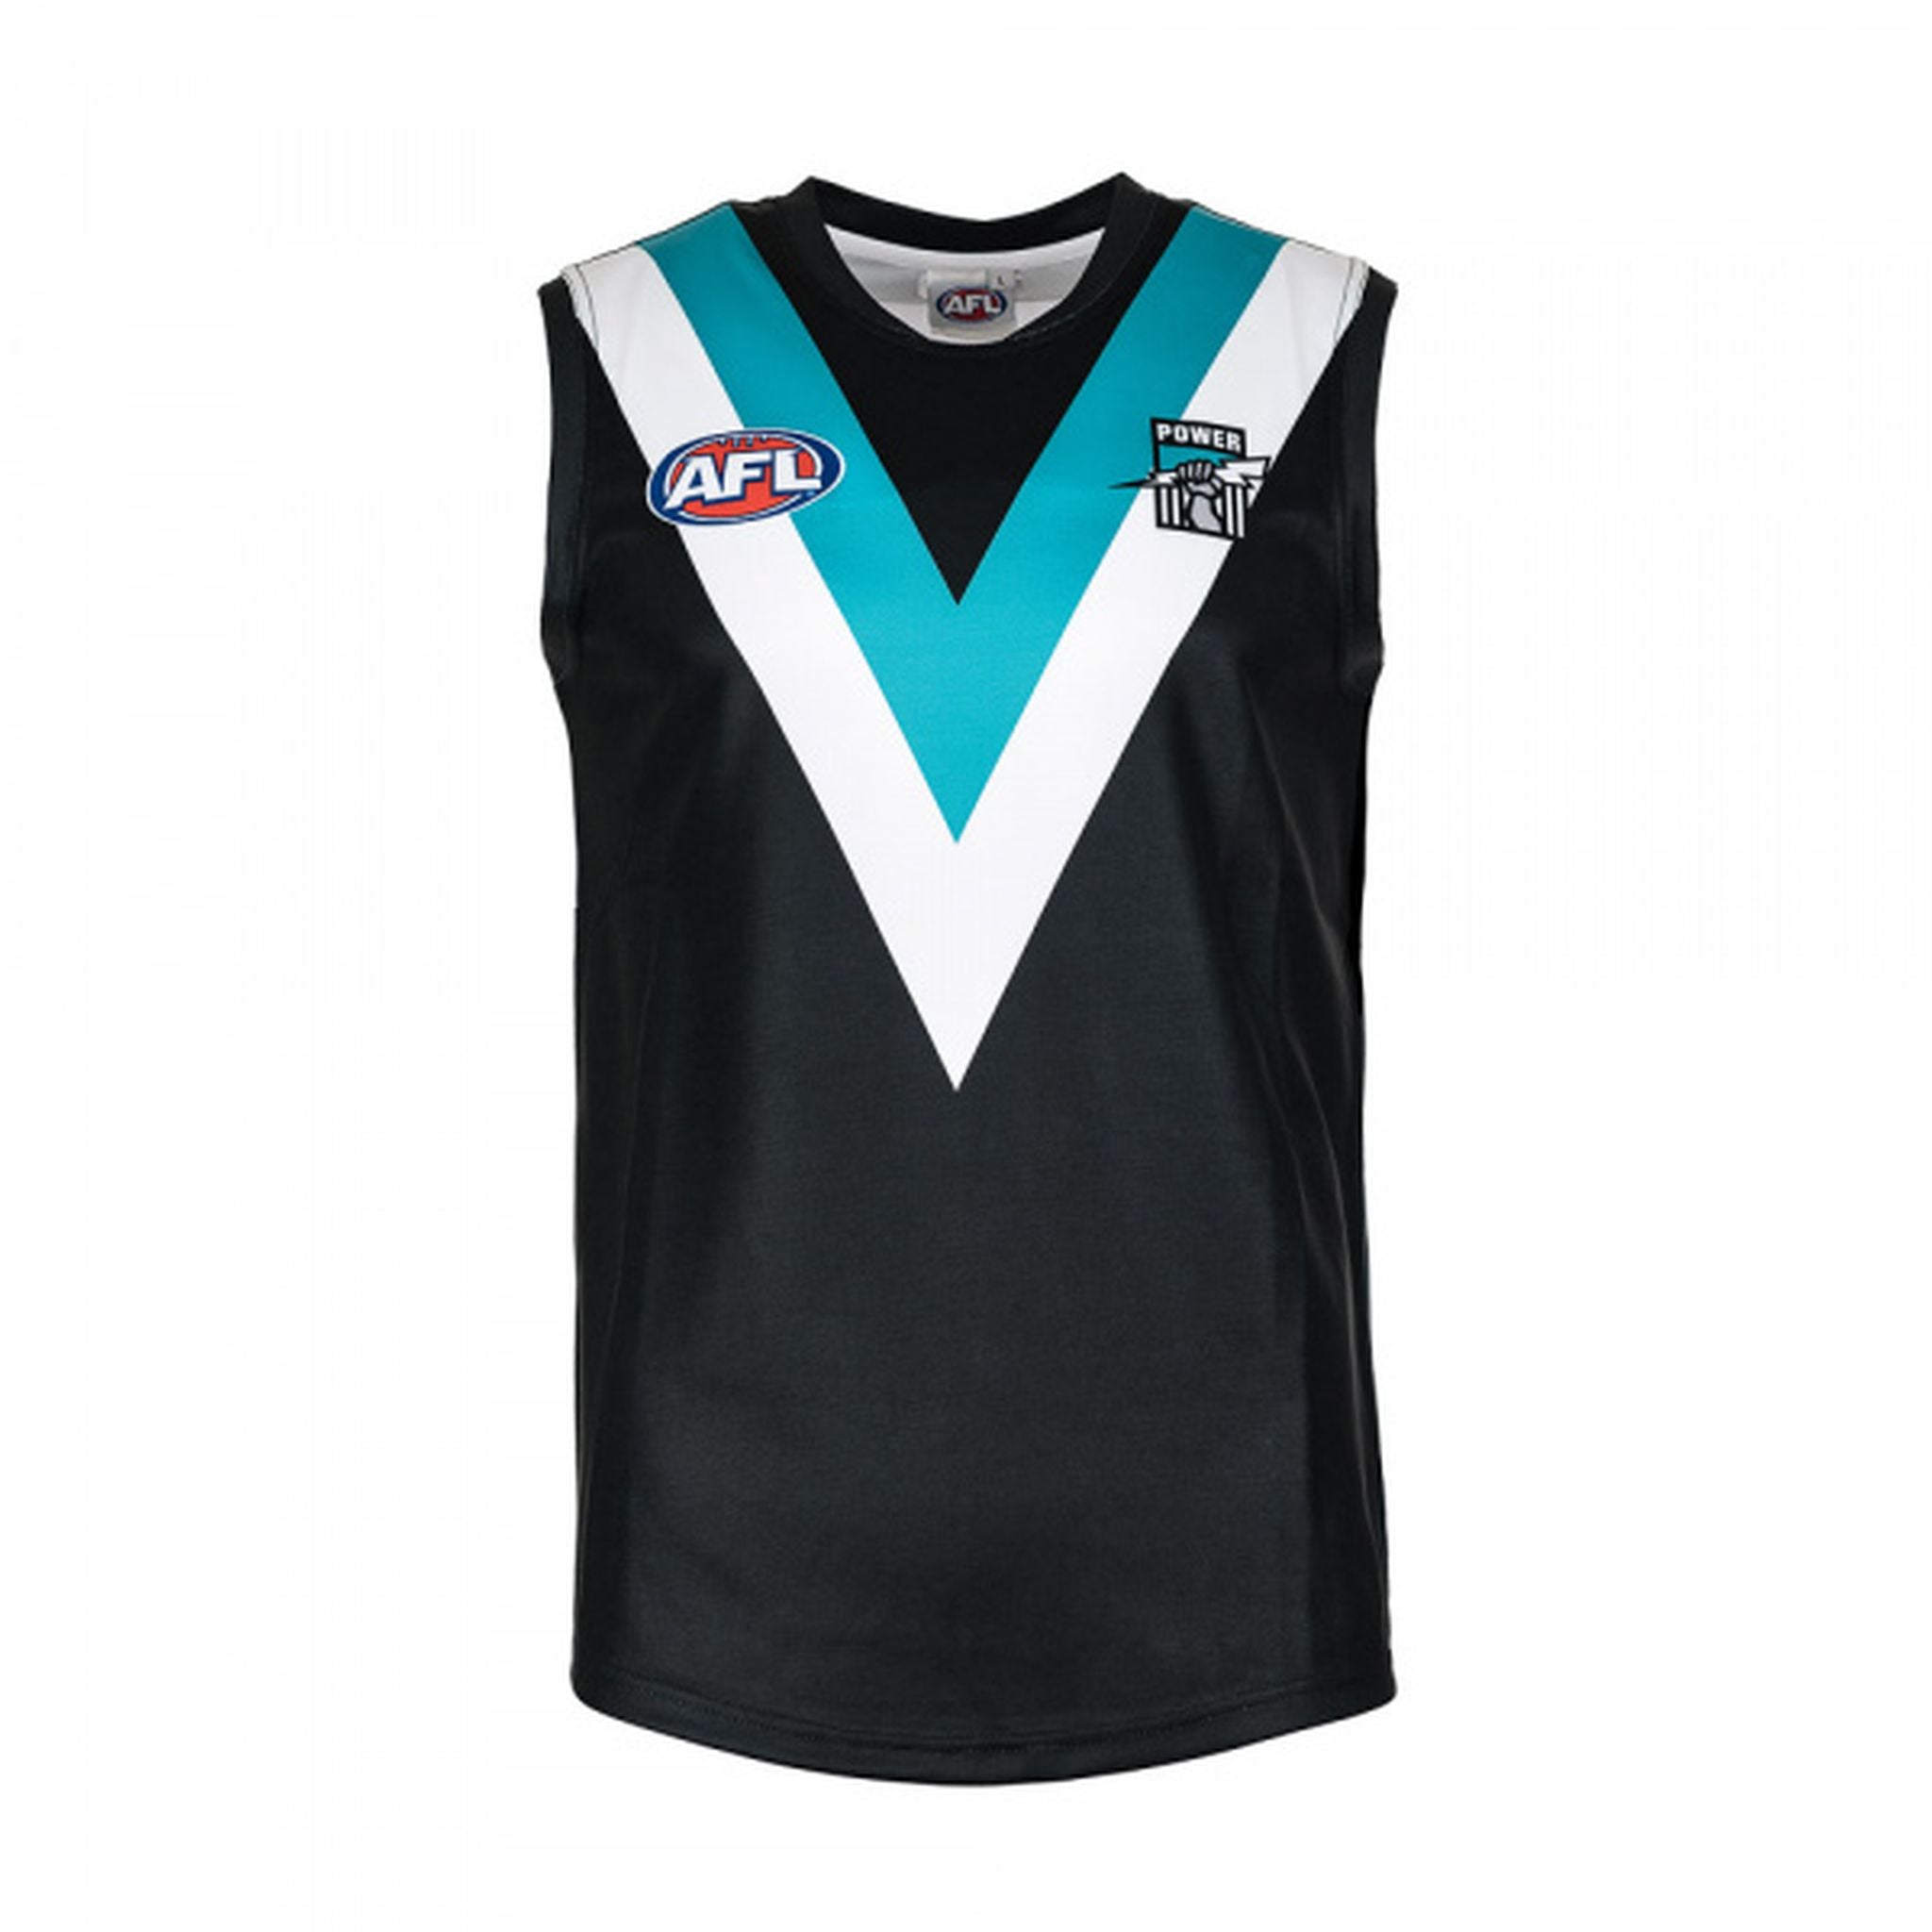 Burley Port Power AFL Home Adults Replica Guernsey